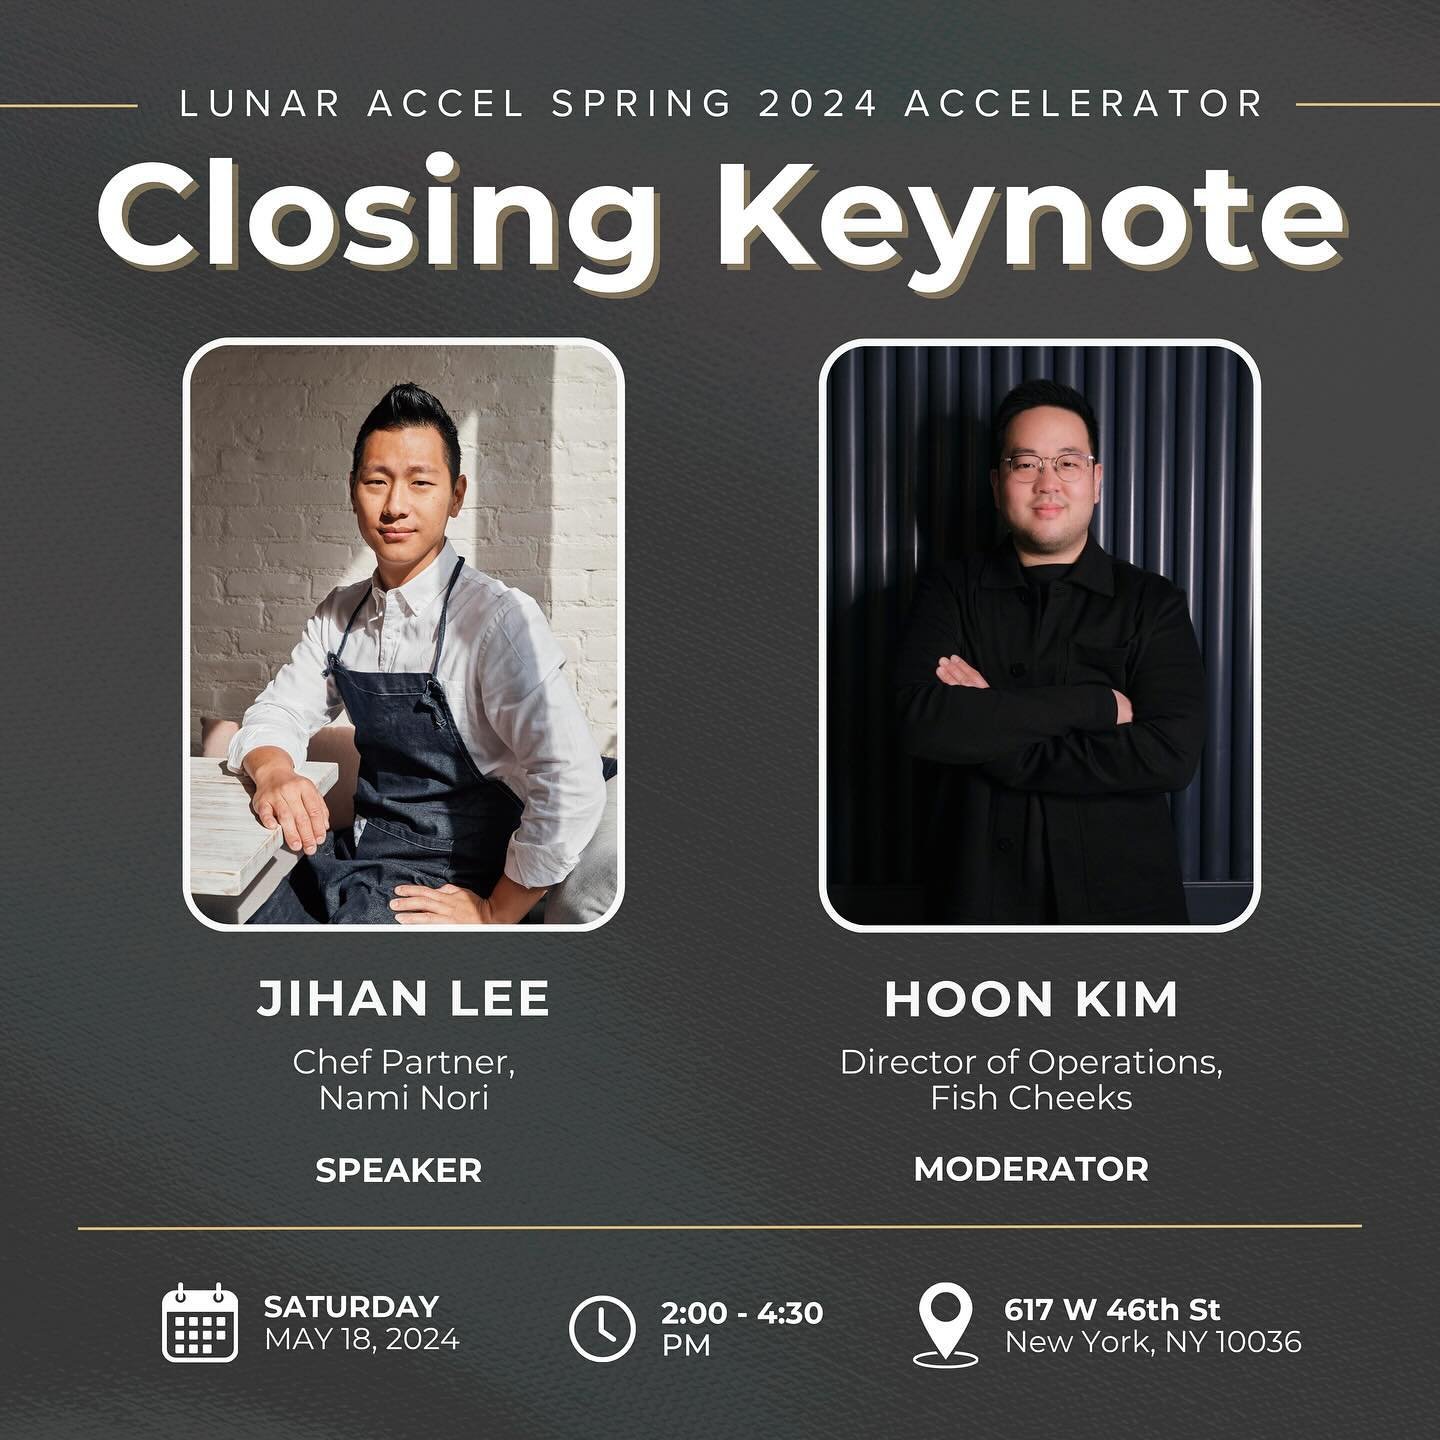 🎟️ GET YOUR TICKETS TODAY - link in bio 🎟️

Join us this Sat, May 18 for our Spring &rsquo;24 Accelerator&rsquo;s closing keynote, with @chefjihanlee, Chef Partner @naminori.nyc, a Japanese restaurant specializing in open temaki with locations in N